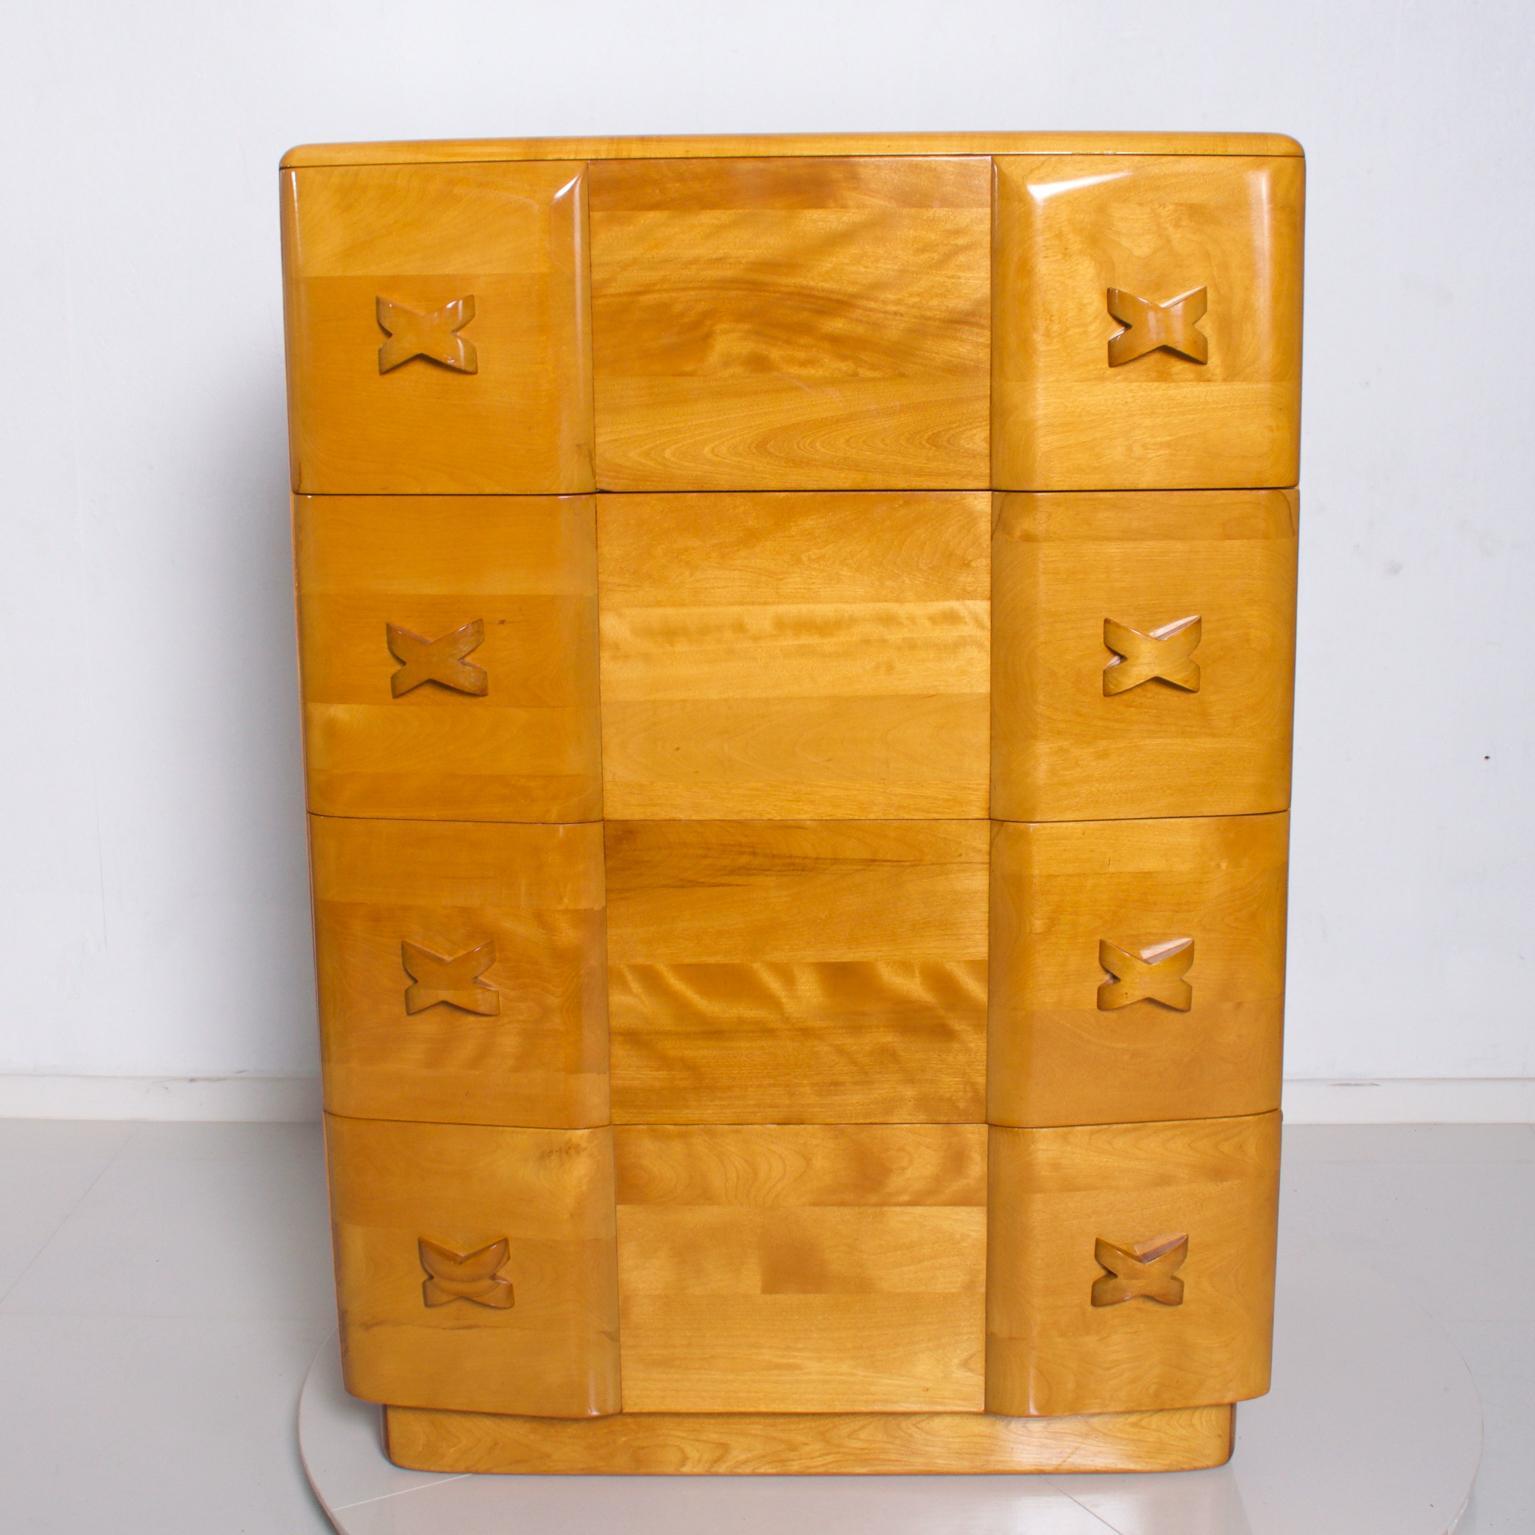 Art Deco Heywood Wakefield Classic Pair of Highboy Dressers Chest of Drawers in Maple Wood. Rio Tall Dressers.
Unparalleled construction of solid wood- built to last forever. From the 1940s. Designed by Leo Jiranek.
Dimensions are:  45 1/4